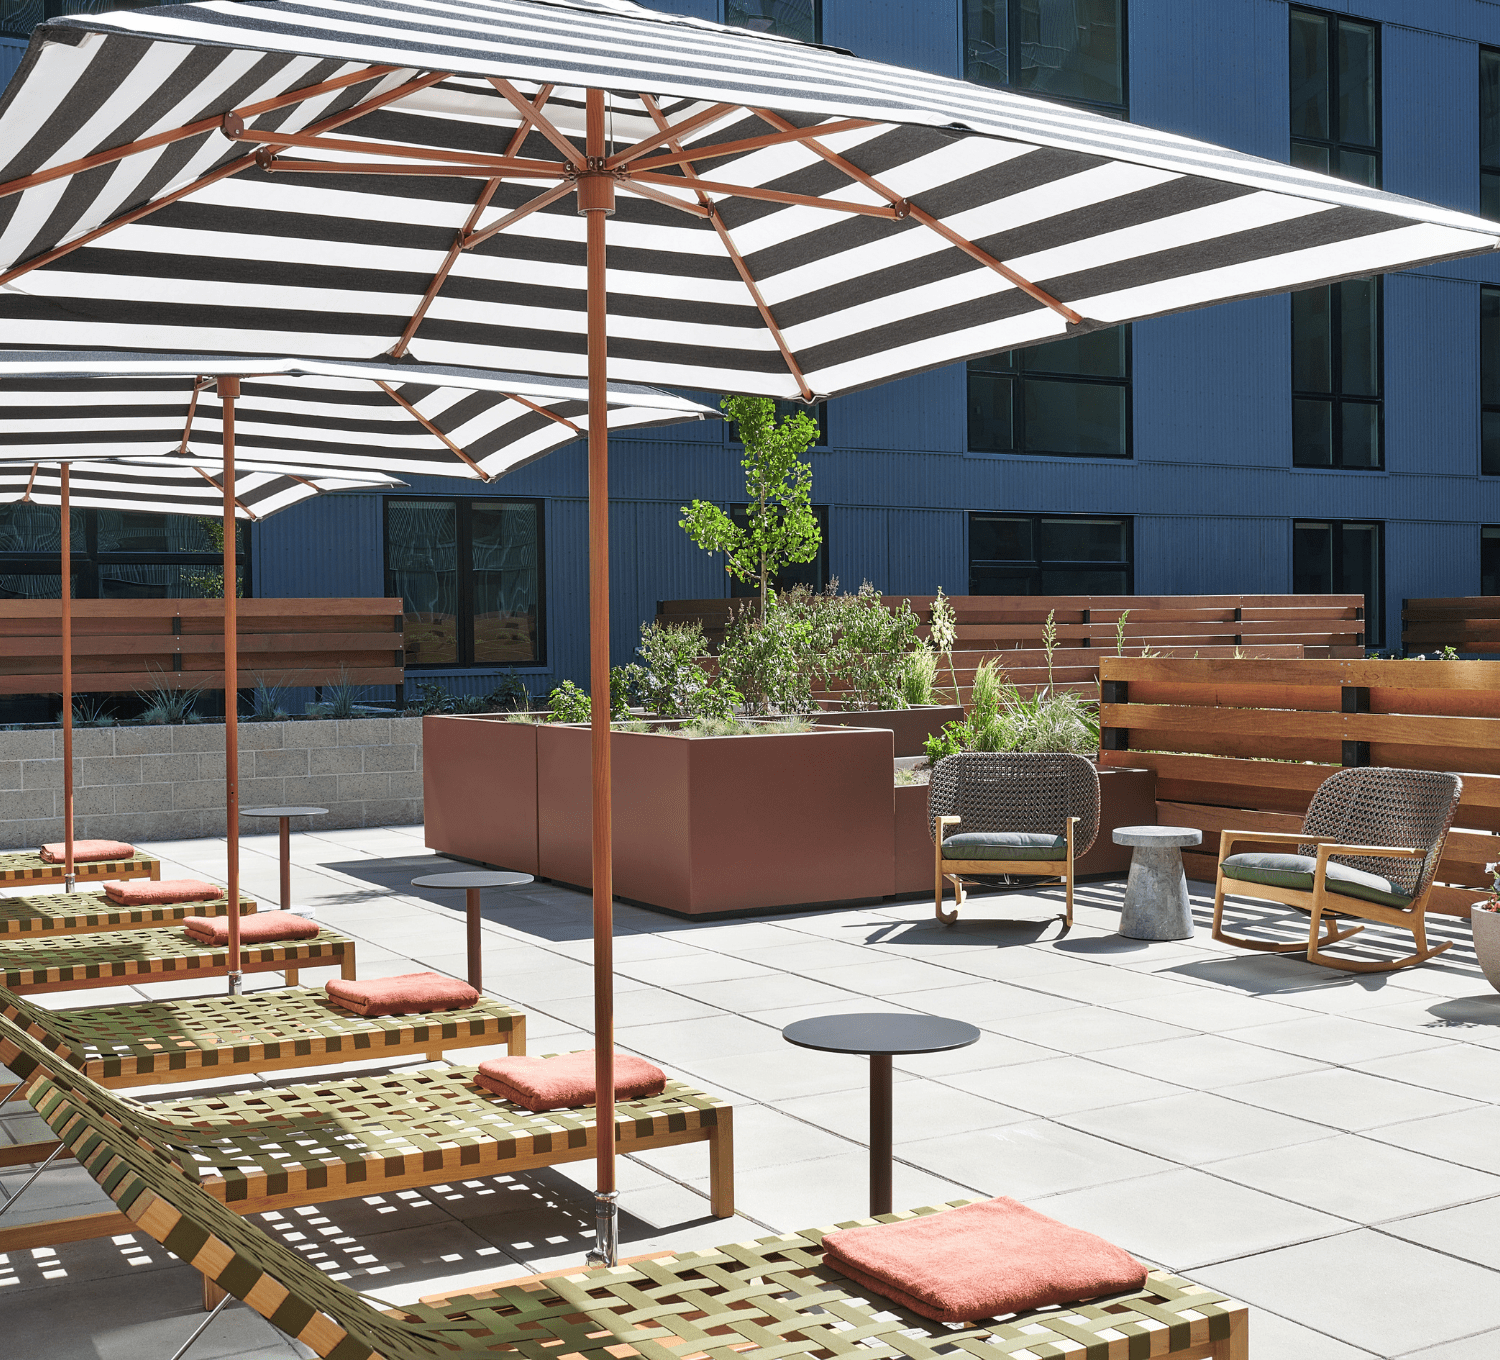 Courtyard with lounge seating and umbrella shades